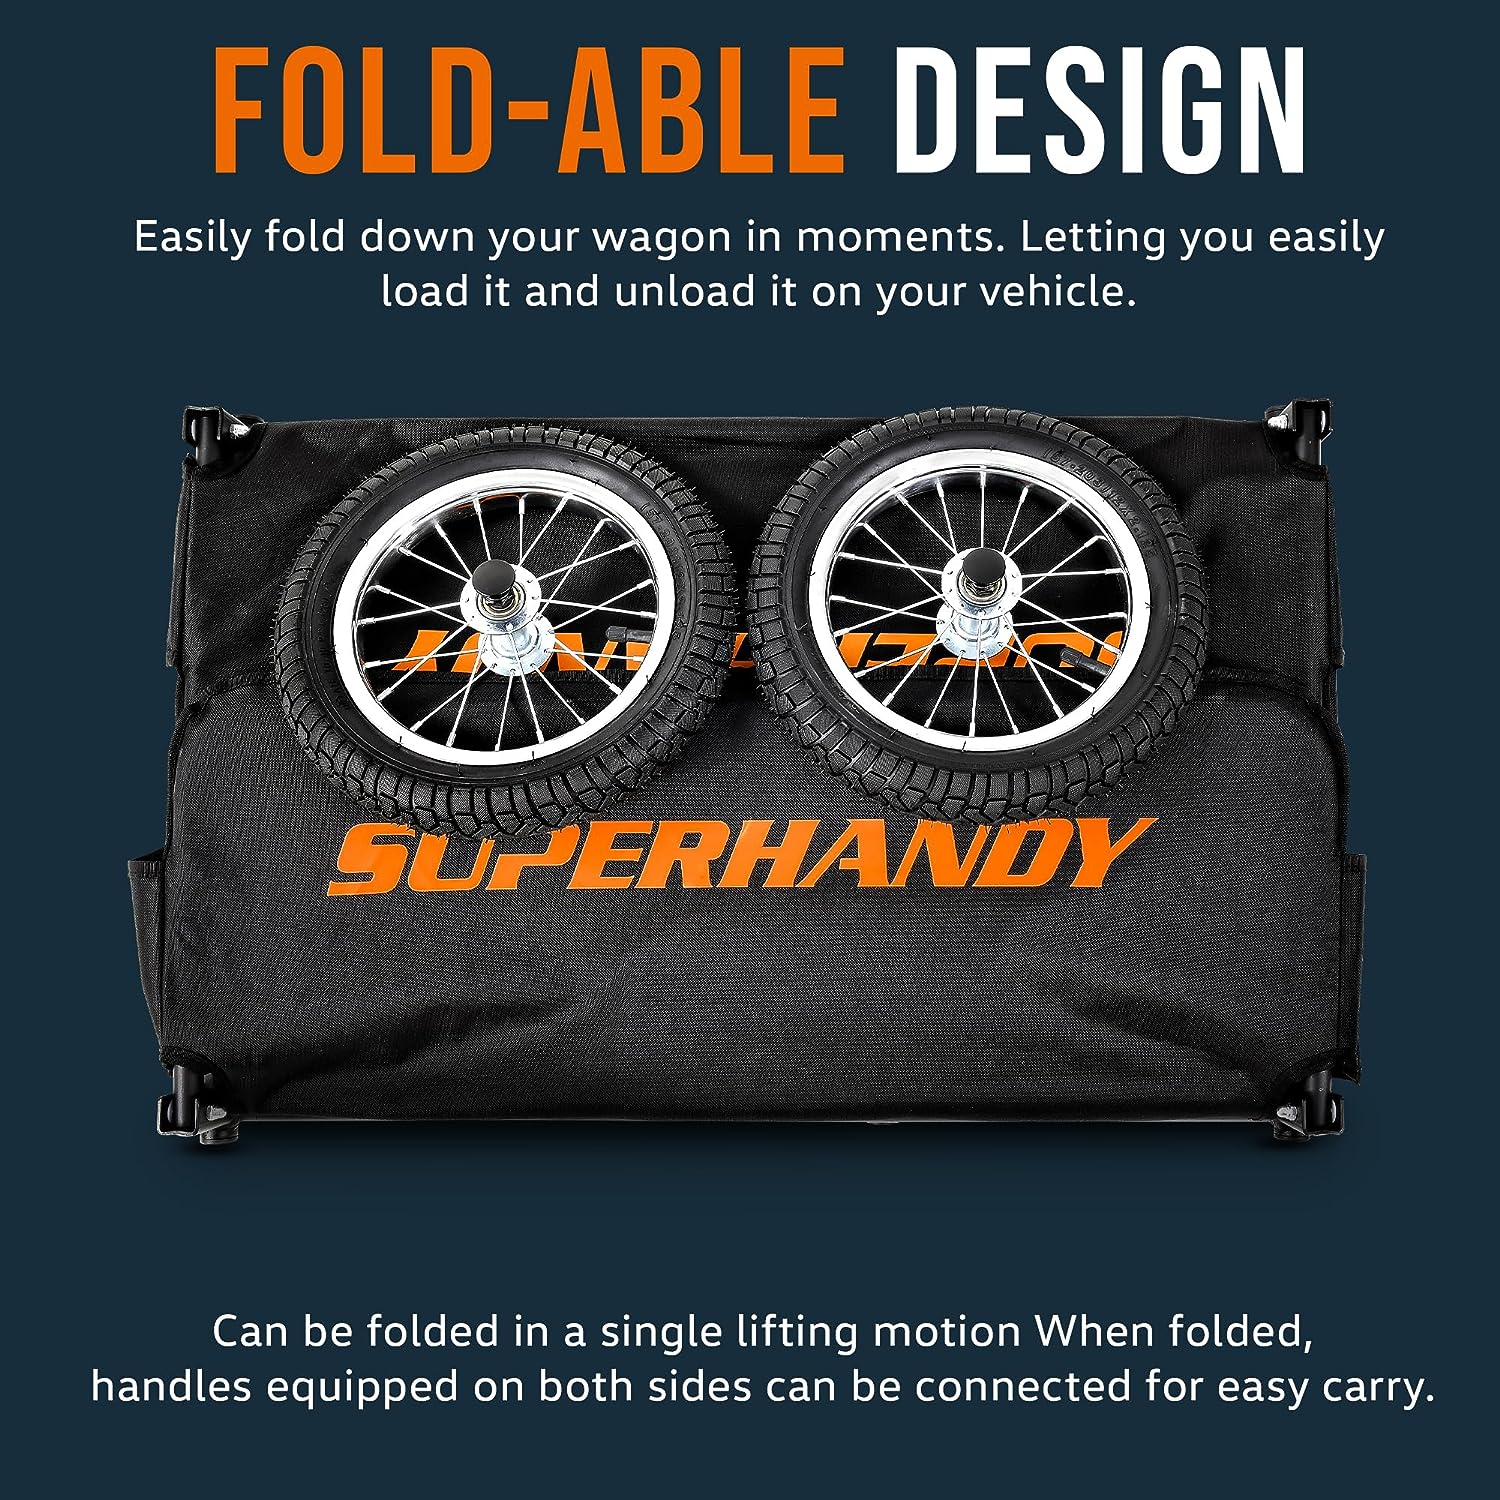 Super Handy GUT157 Foldable Follow Behind Wagon 155 lbs Capacity Compatible with GUT112/GUT140/GUT142/G Mobility Scooters New